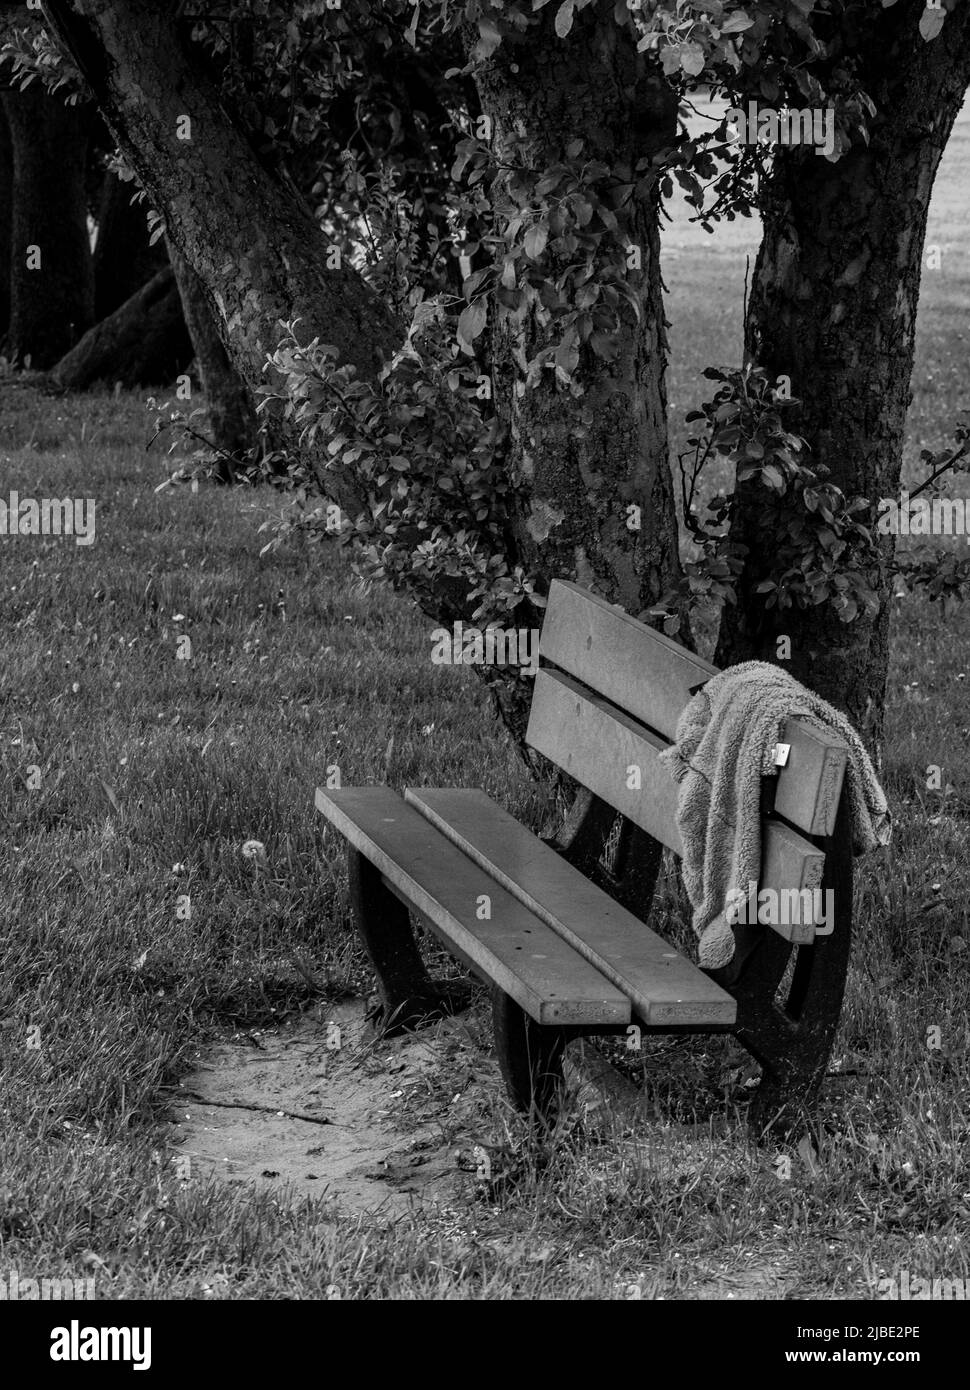 A Minimalist photo of a lone bench in a park, with a sweater left on it, giving a feeling of abandoned - stock photography Stock Photo